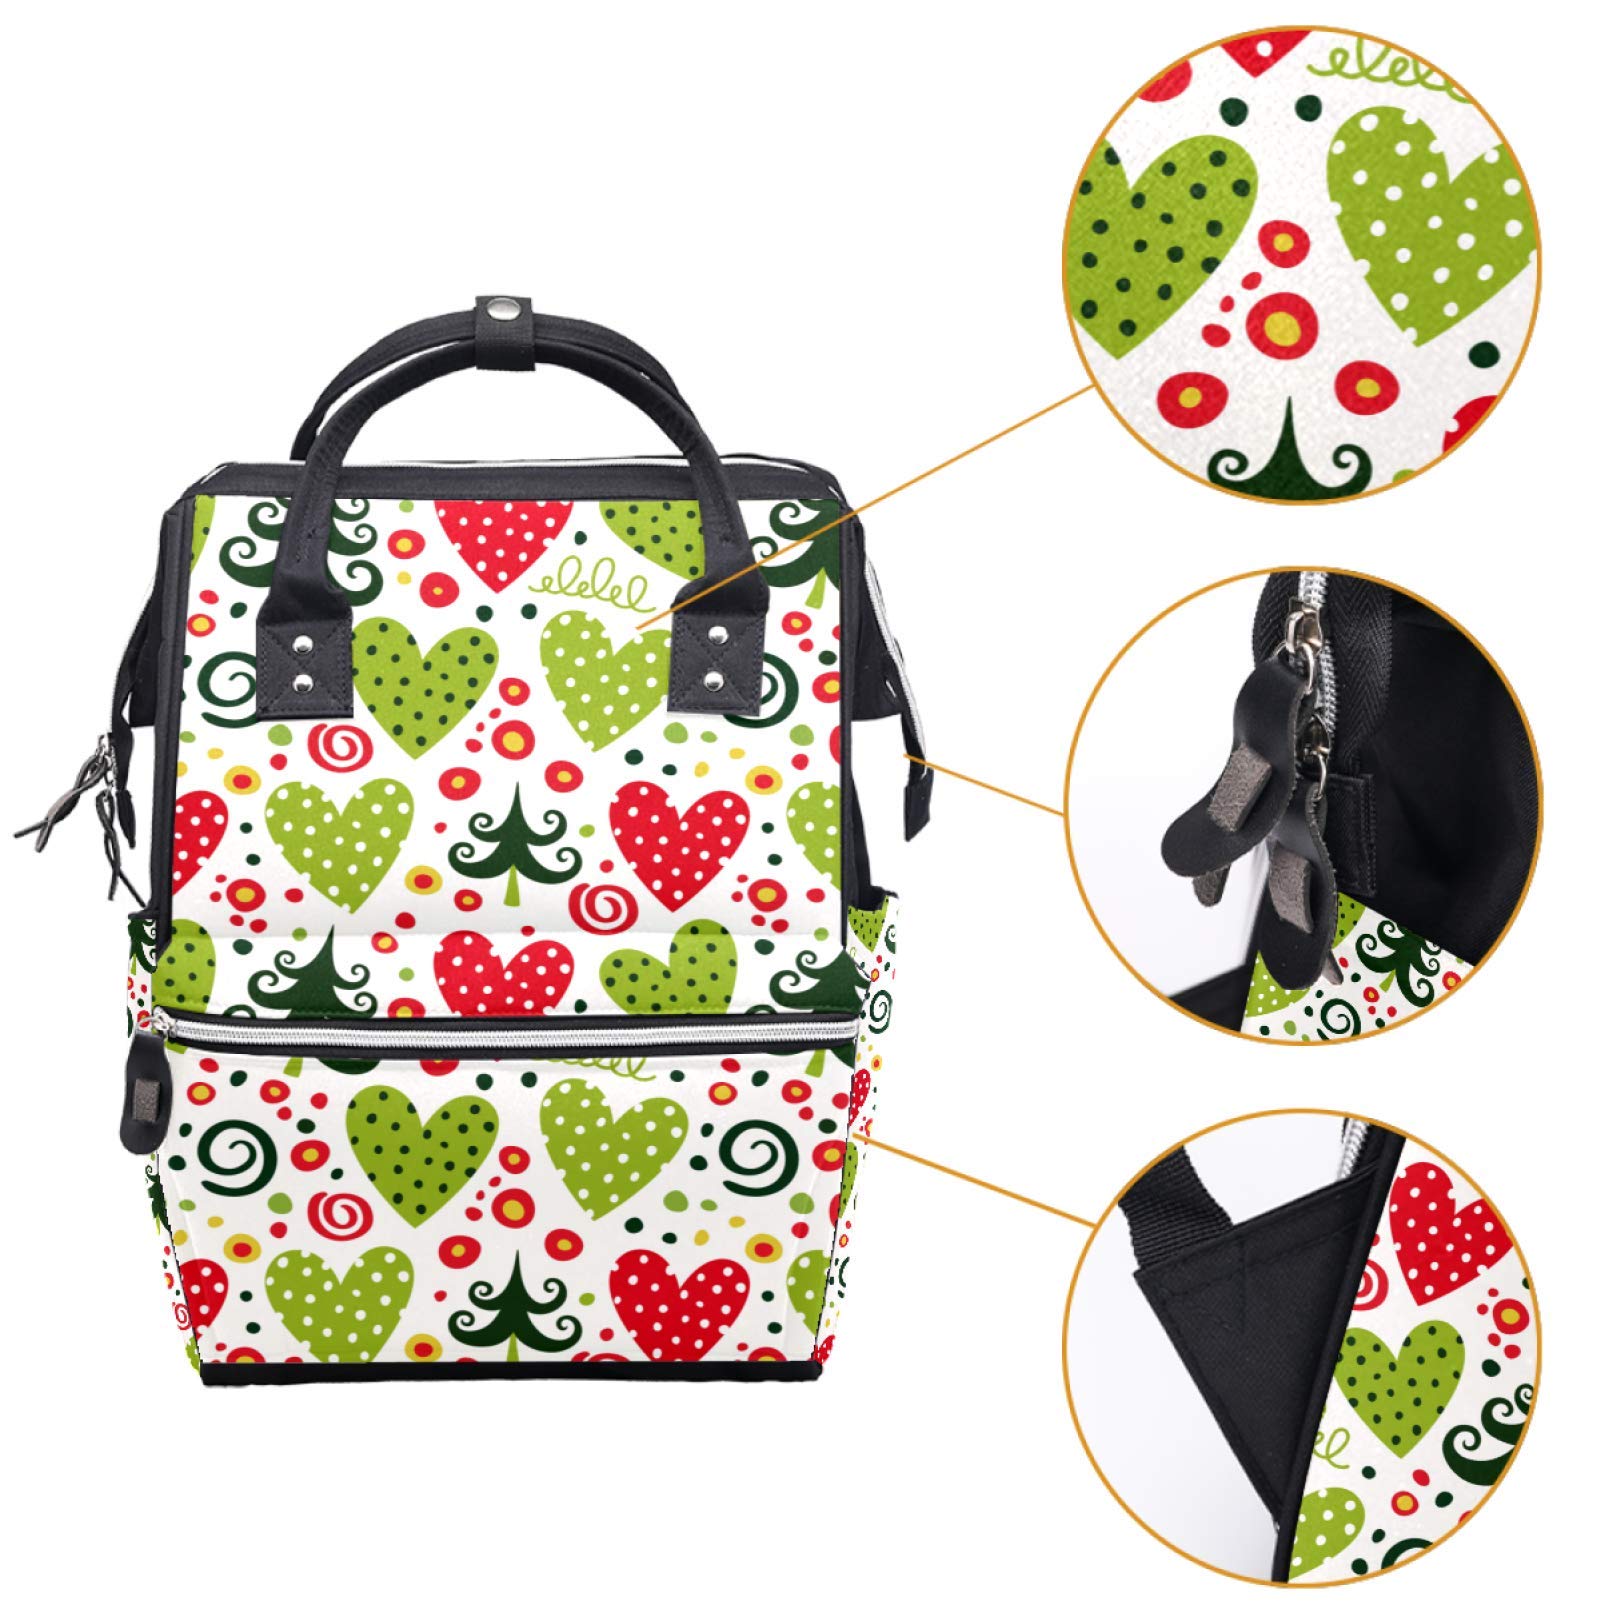 Inhomer Christmas Trees Polka Dots Heart and Confetti Diaper Bag Travel Mom Bags Nappy Backpack Large Capacity for Baby Care